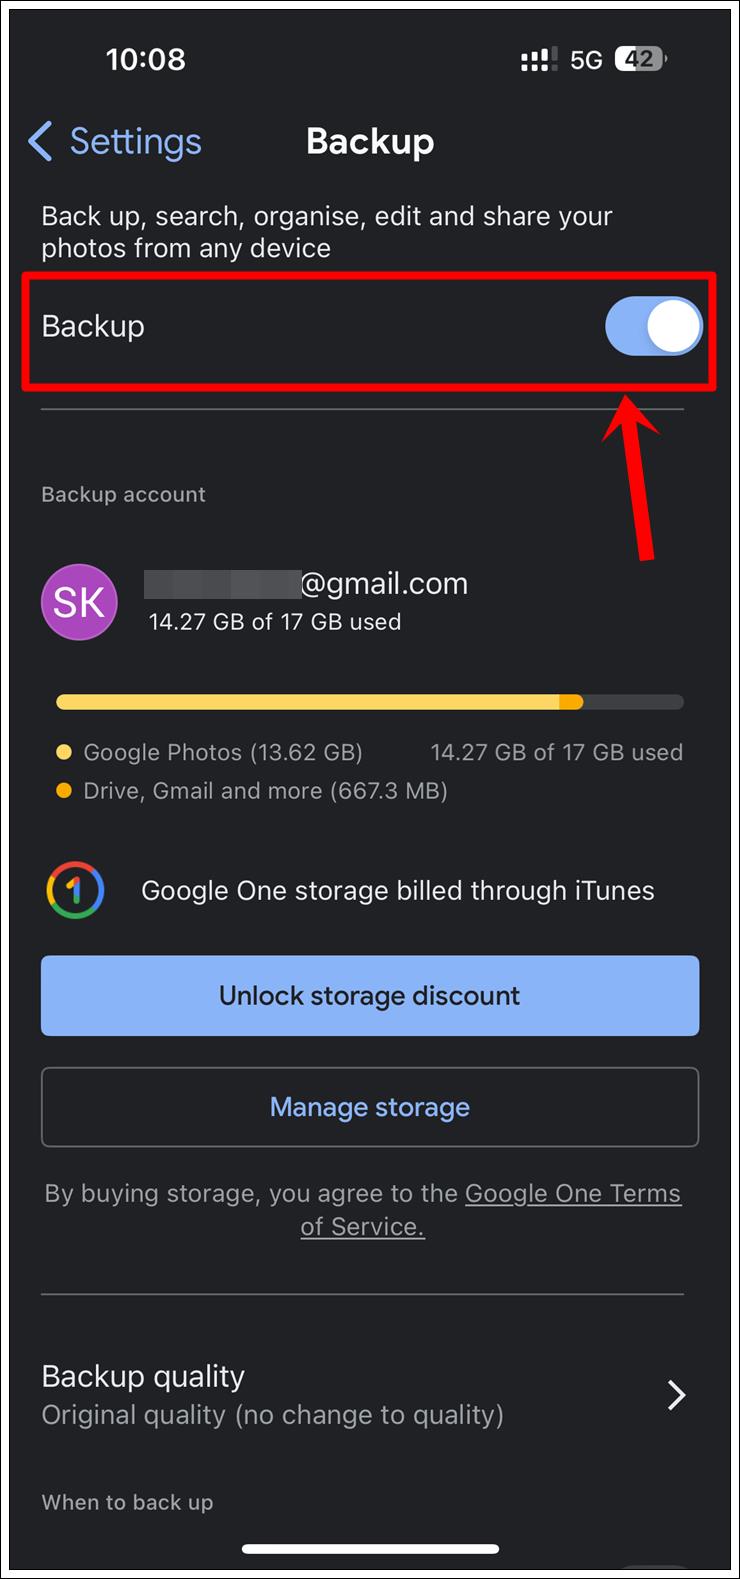 This image shows a screenshot of the Google Photos 'Backup' page on an iPhone. The 'Backup' option with its Toggle On/Off button is highlighted.